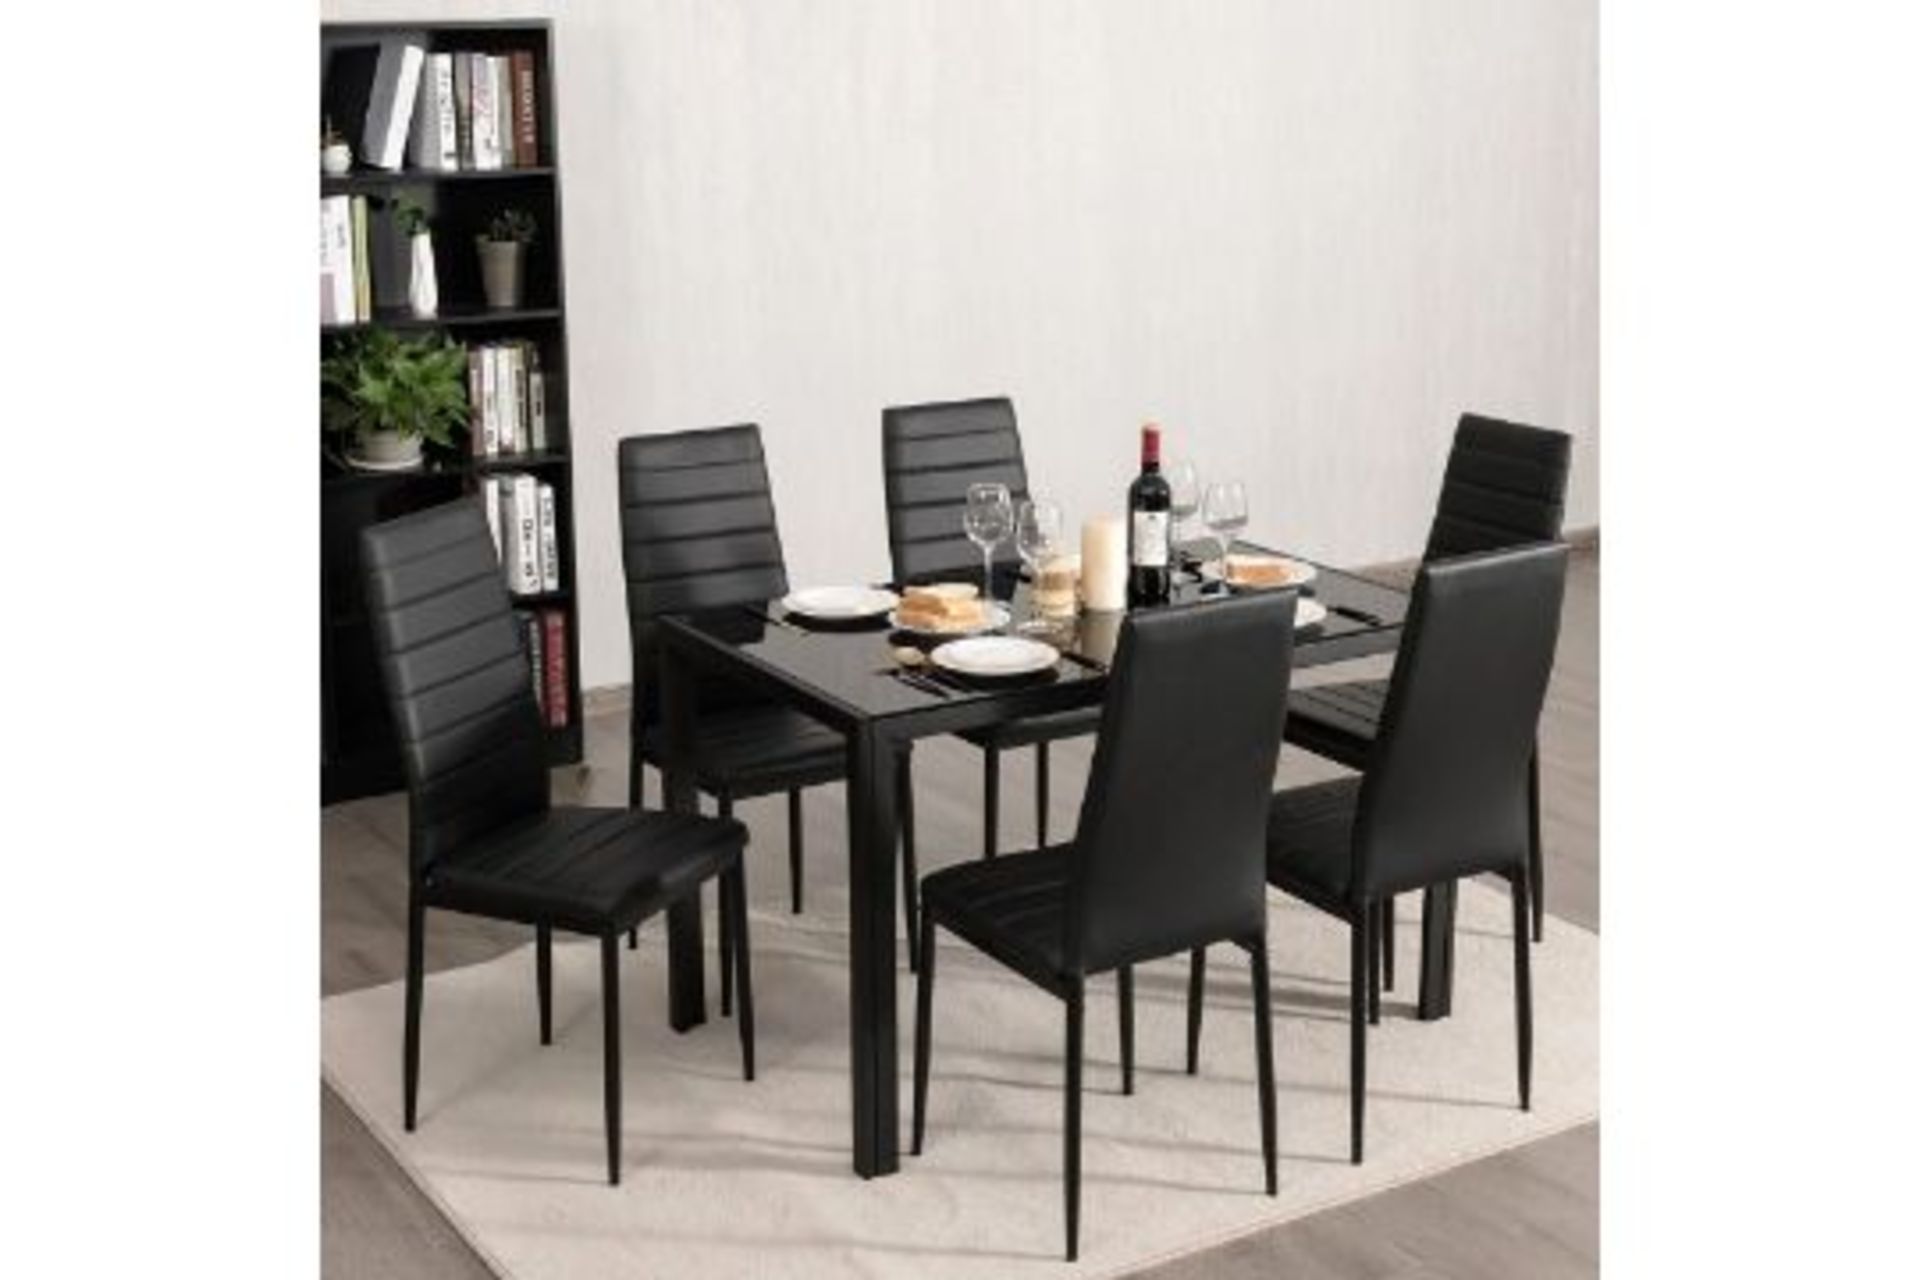 Set of 6 Dining Chair High Back PU Leather Kitchen Side Chairs Home Furniture. - R14.5.